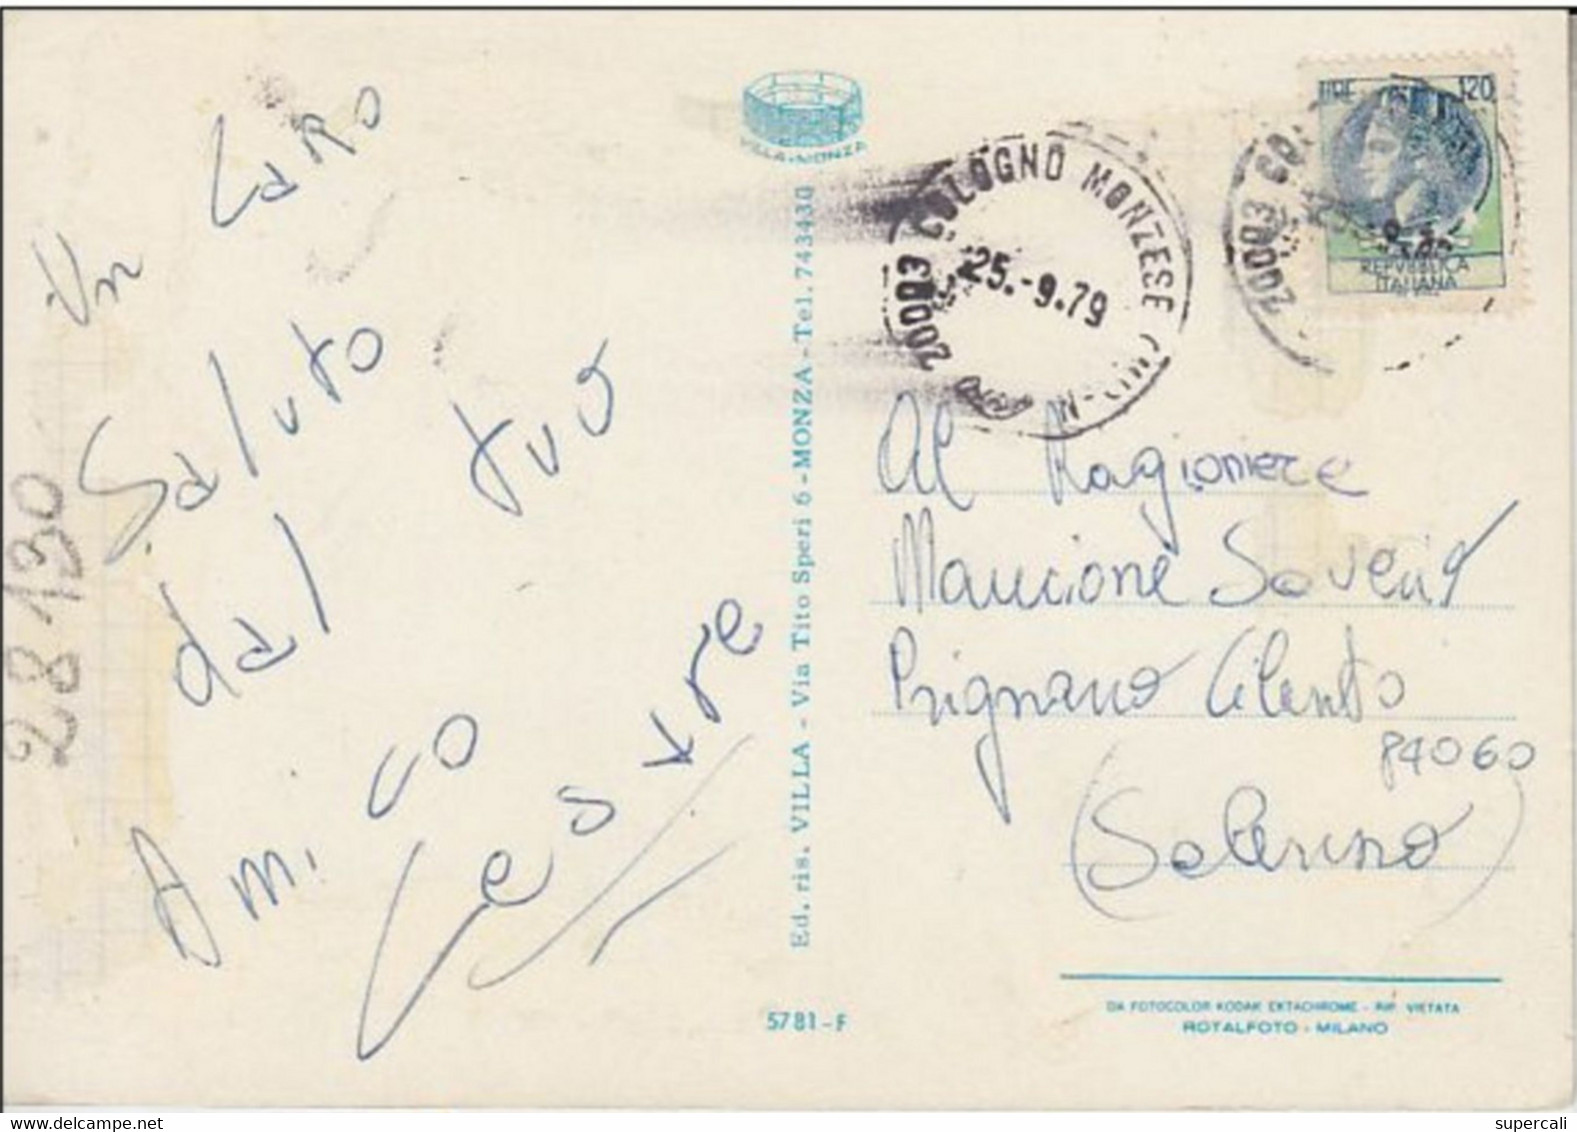 RT28.130  ITALIE.   COLOGNO MONZESE. LOMBARDIE.CINQ  VUES - Cologno Monzese